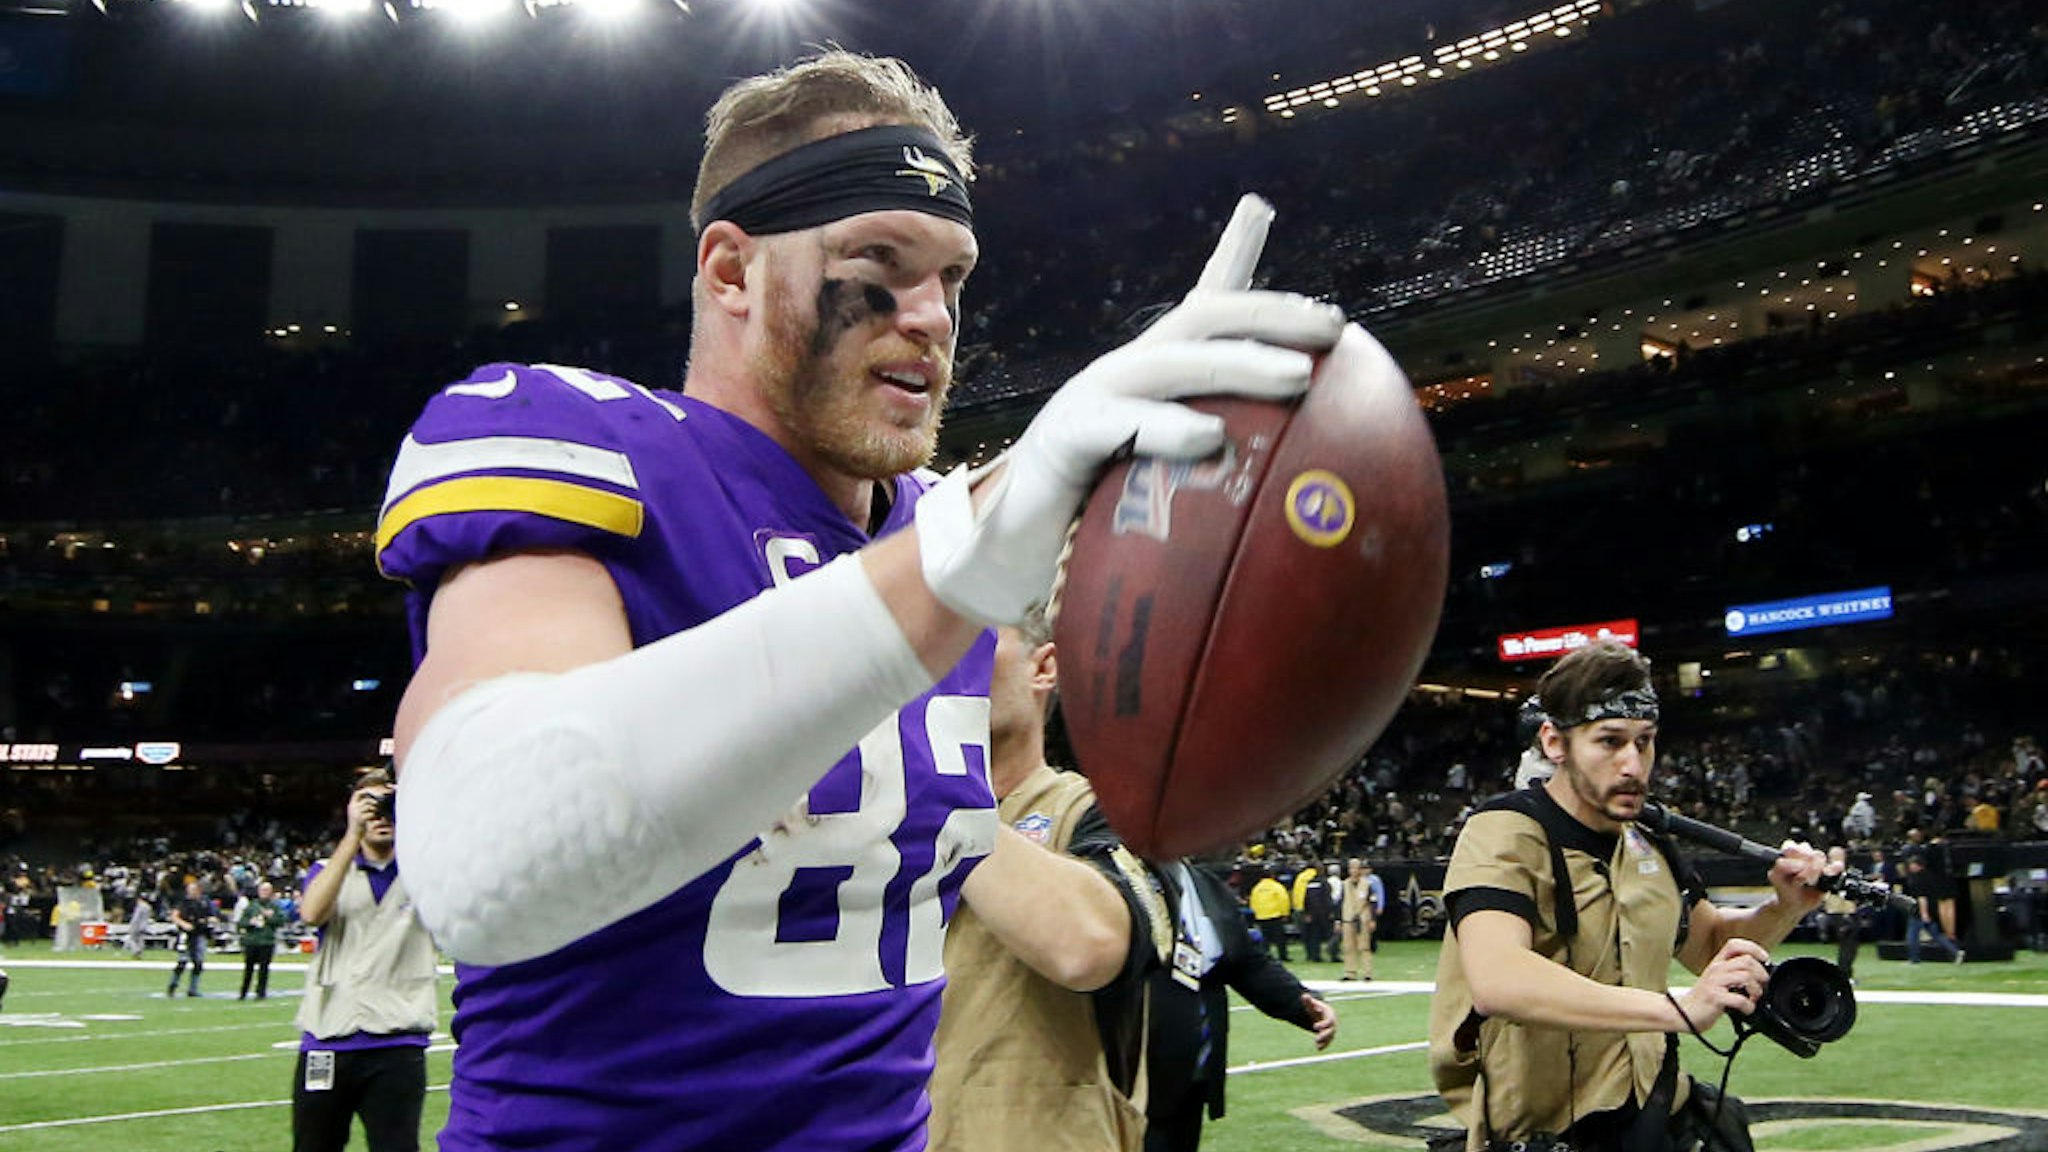 Kyle Rudolph #82 of the Minnesota Vikings celebrates after defeating the New Orleans Saints 26-20 during overtime in the NFC Wild Card Playoff game at Mercedes Benz Superdome on January 05, 2020 in New Orleans, Louisiana.